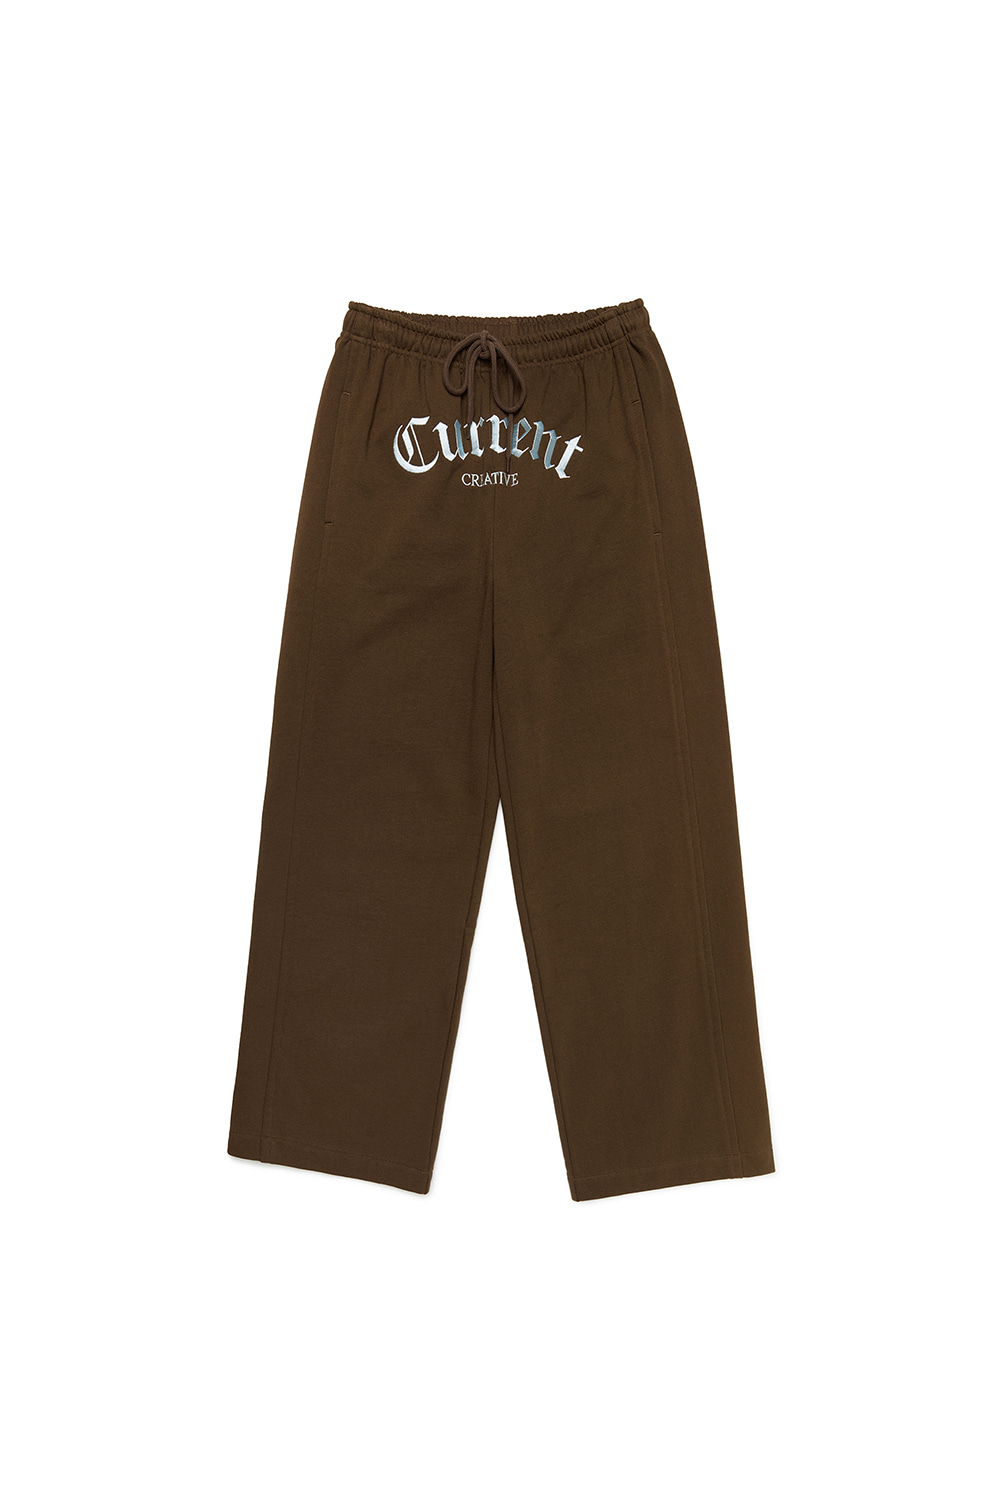 CURRENT FULL LENGTH TRAINING PANTS [BROWN]		